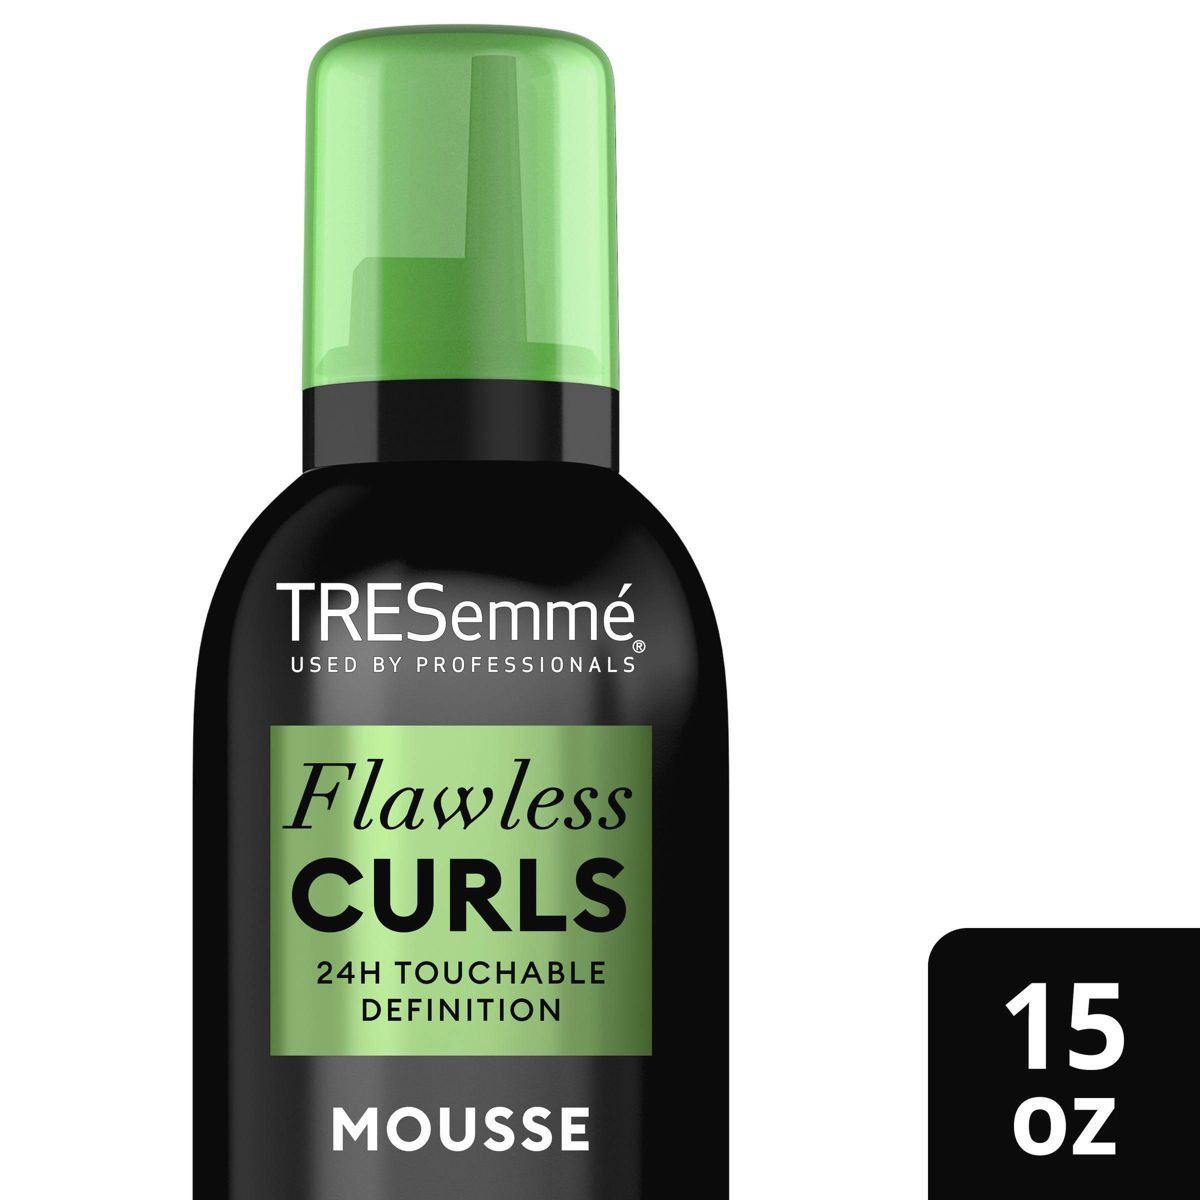 Tresemme Flawless Curls Hair Mousse | Target